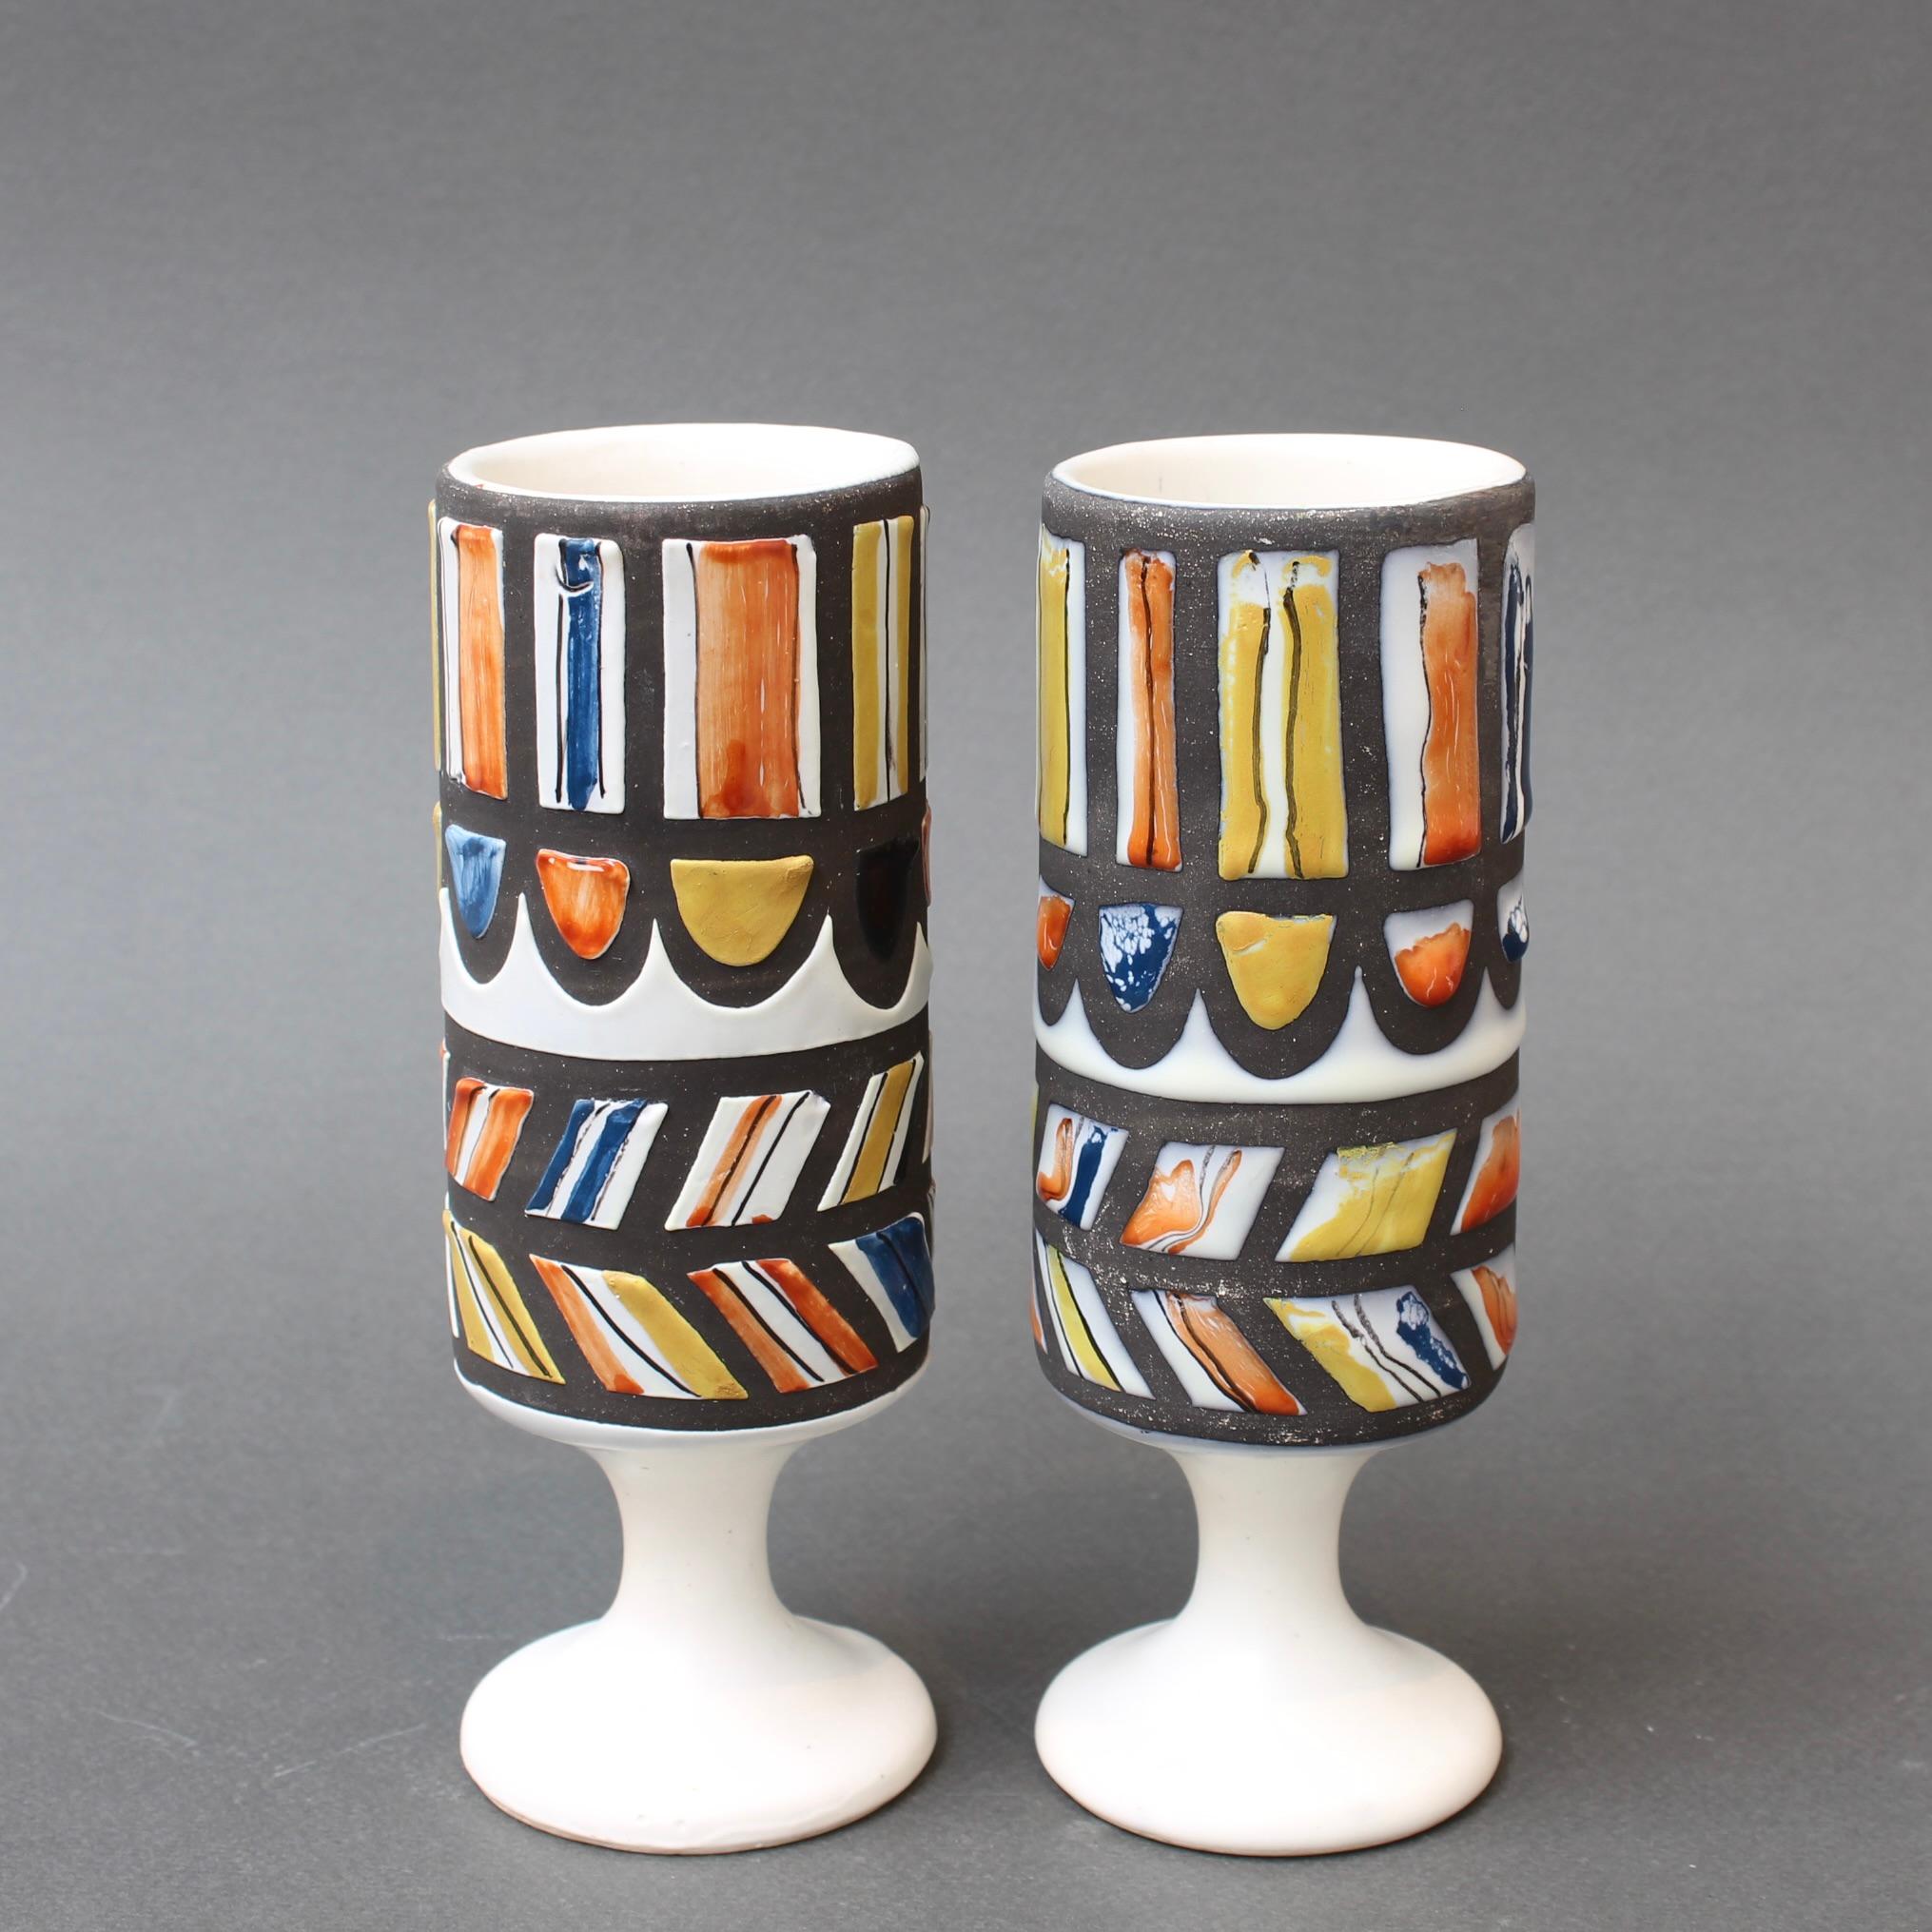 Vintage French Ceramic Set of Vessels by Roger Capron (circa 1960s) For Sale 4